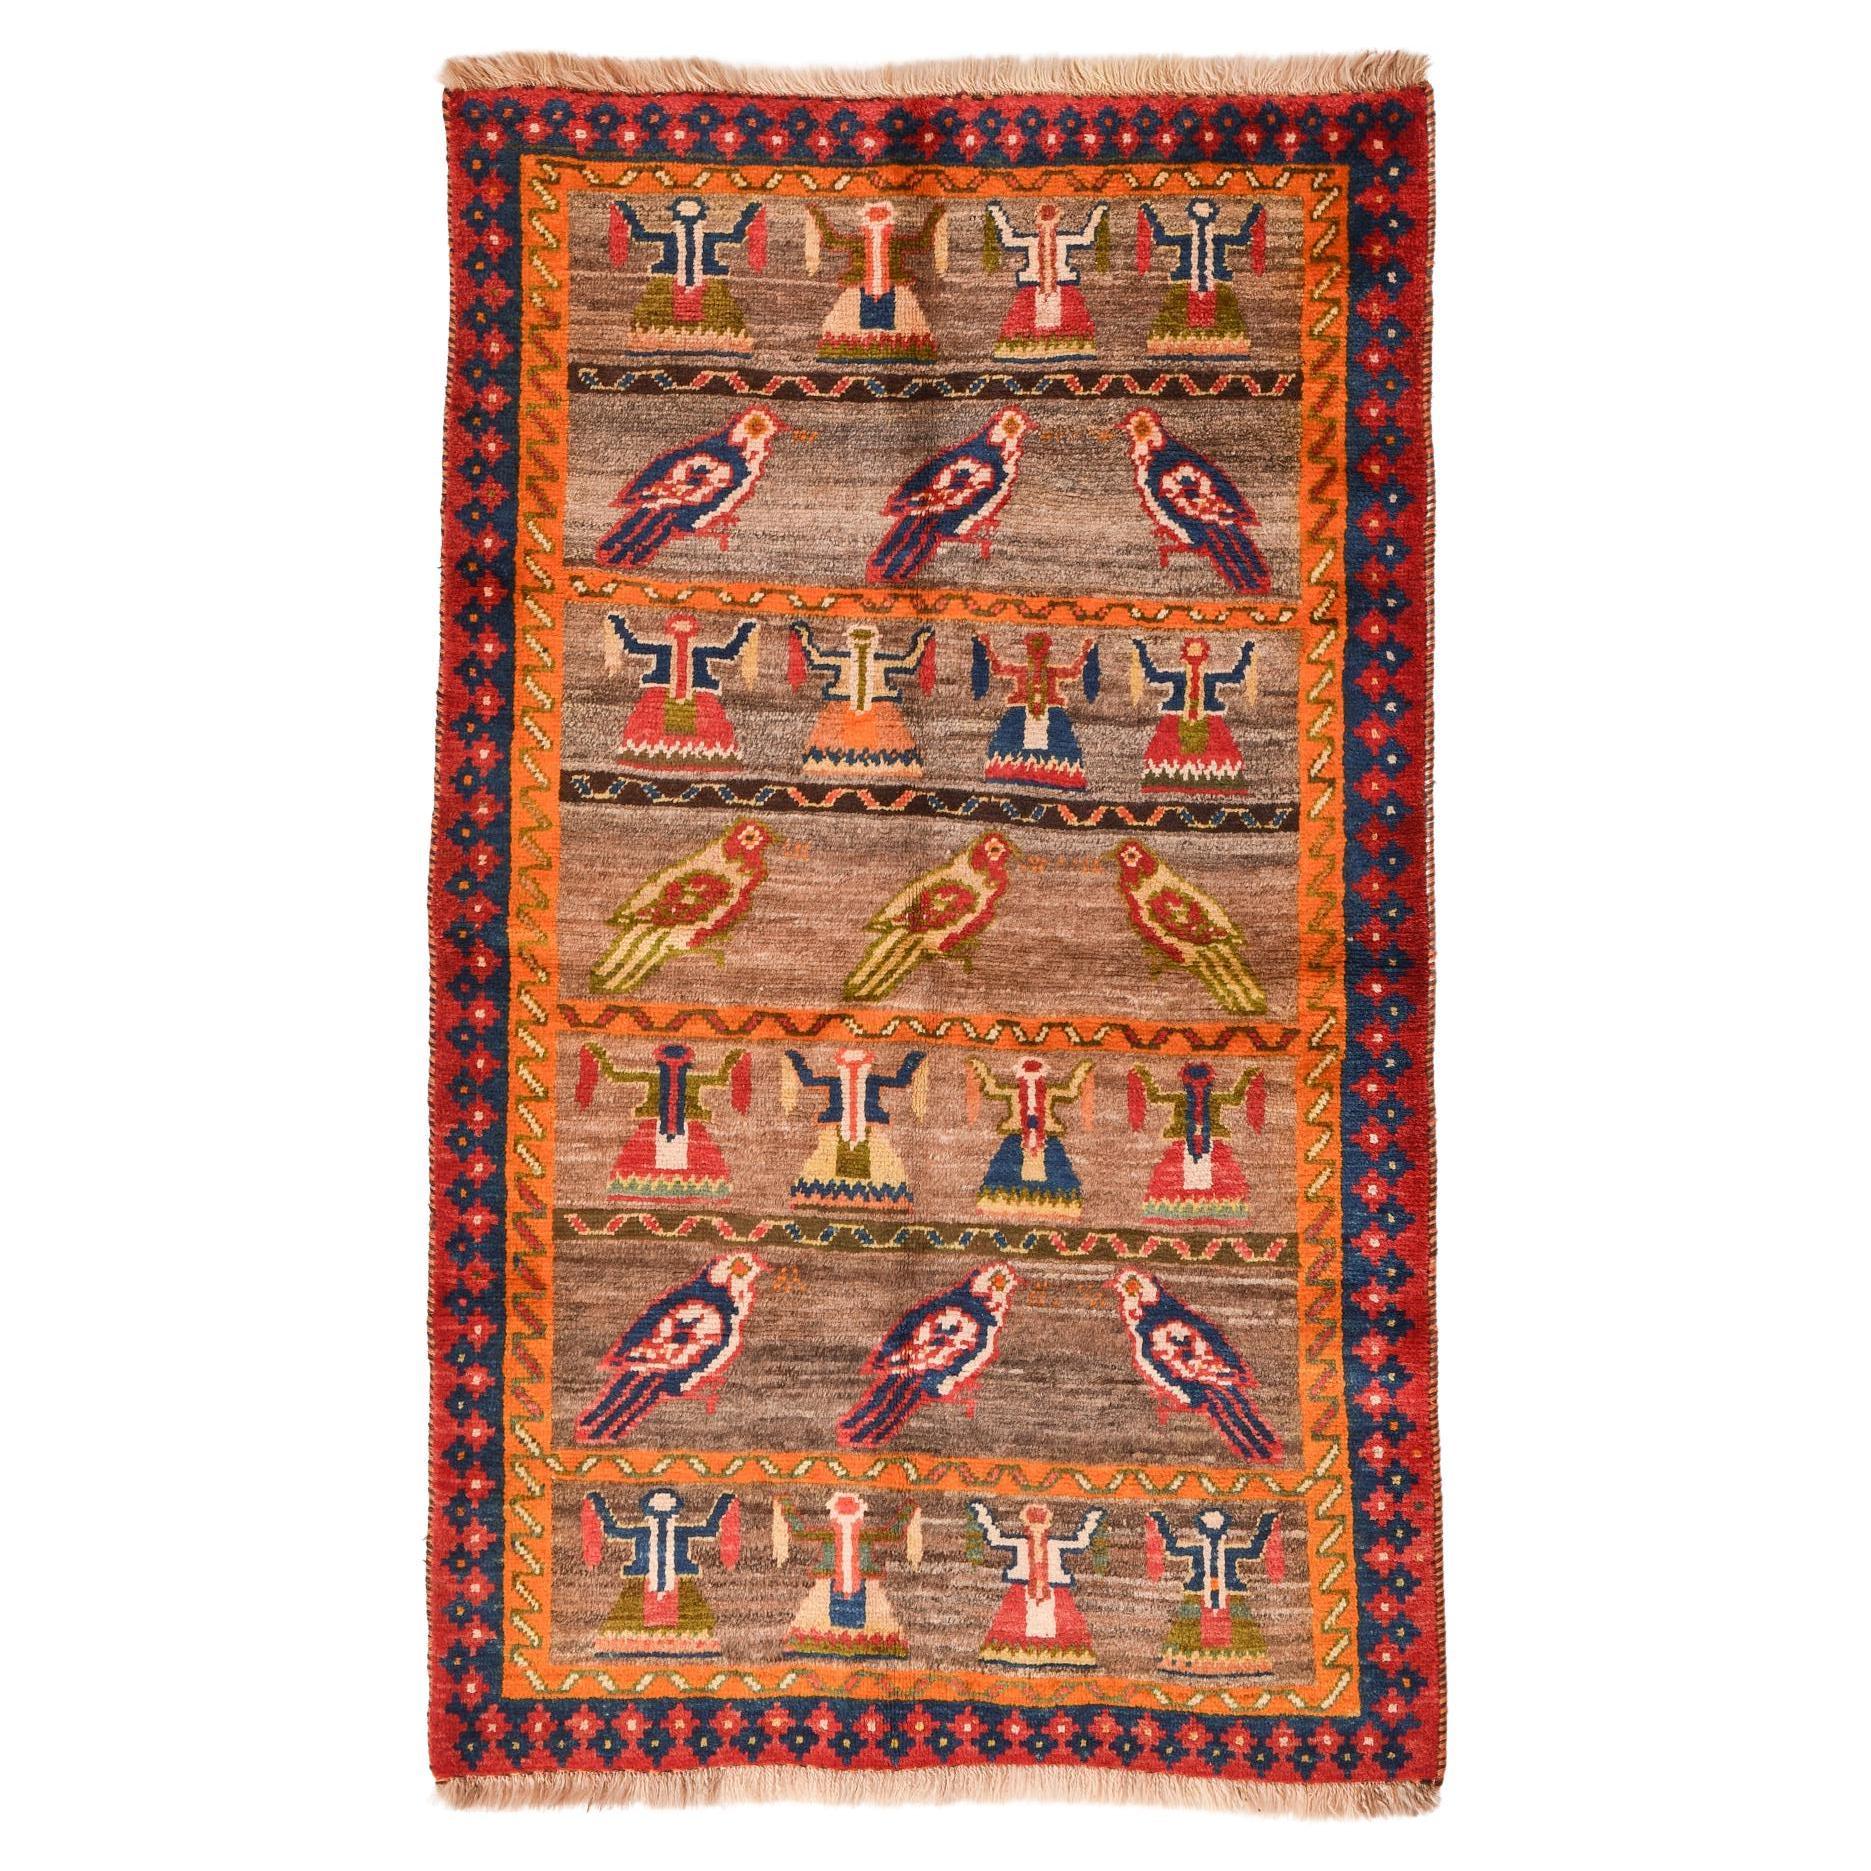 Nomadic Carpet with Dancing Women For Sale